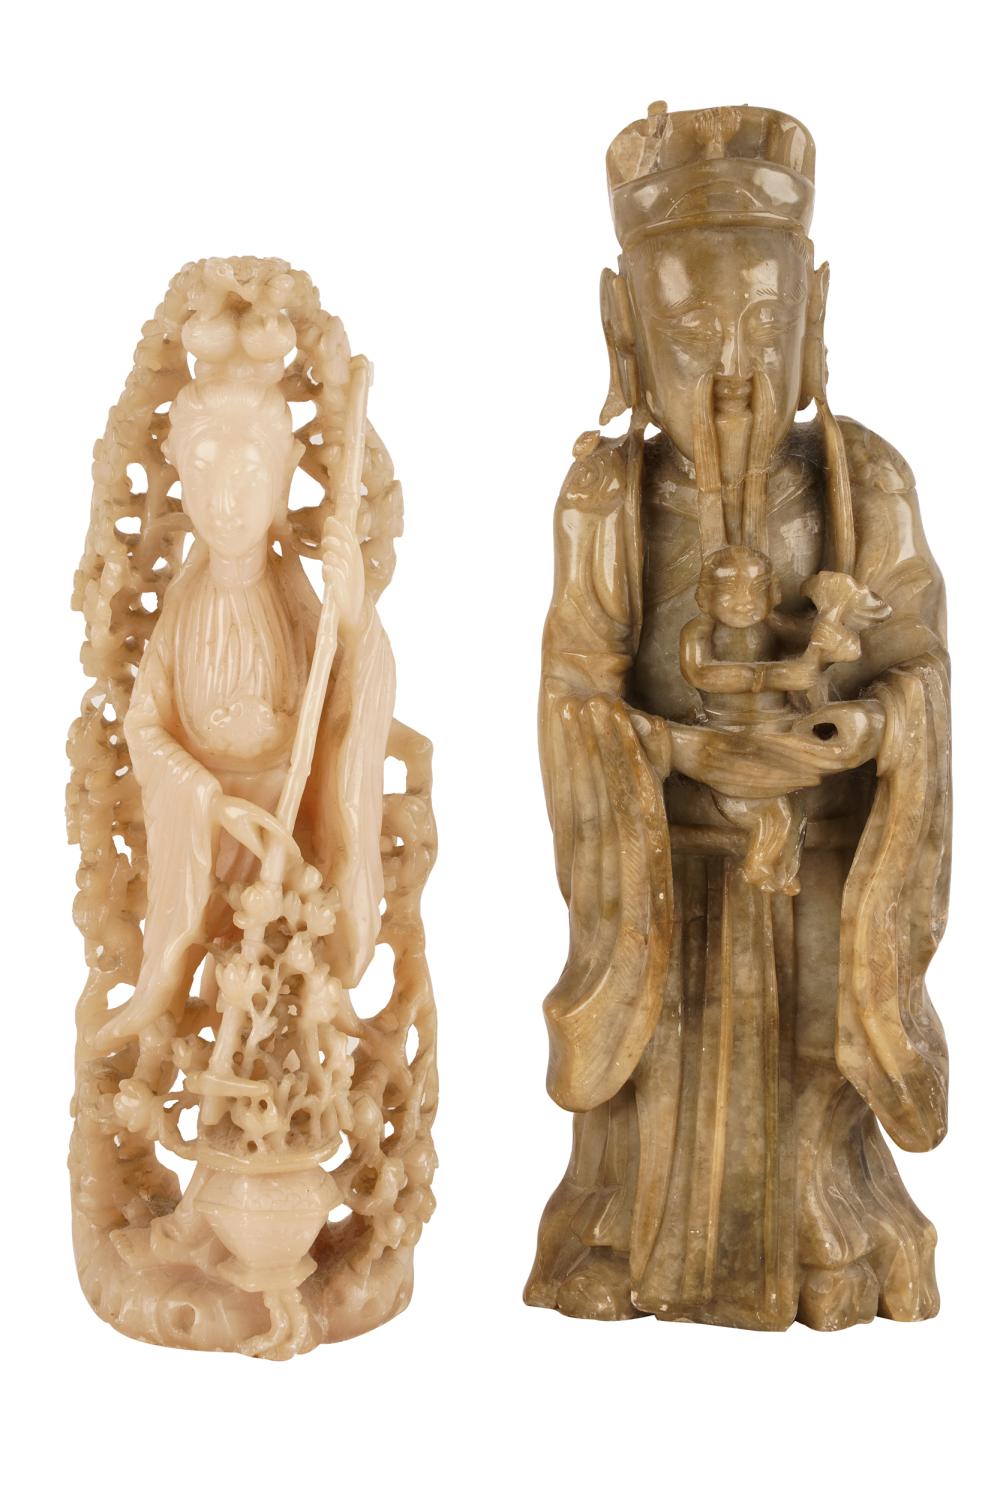 TWO ASIAN SOAPSTONE FIGURAL CARVINGSof